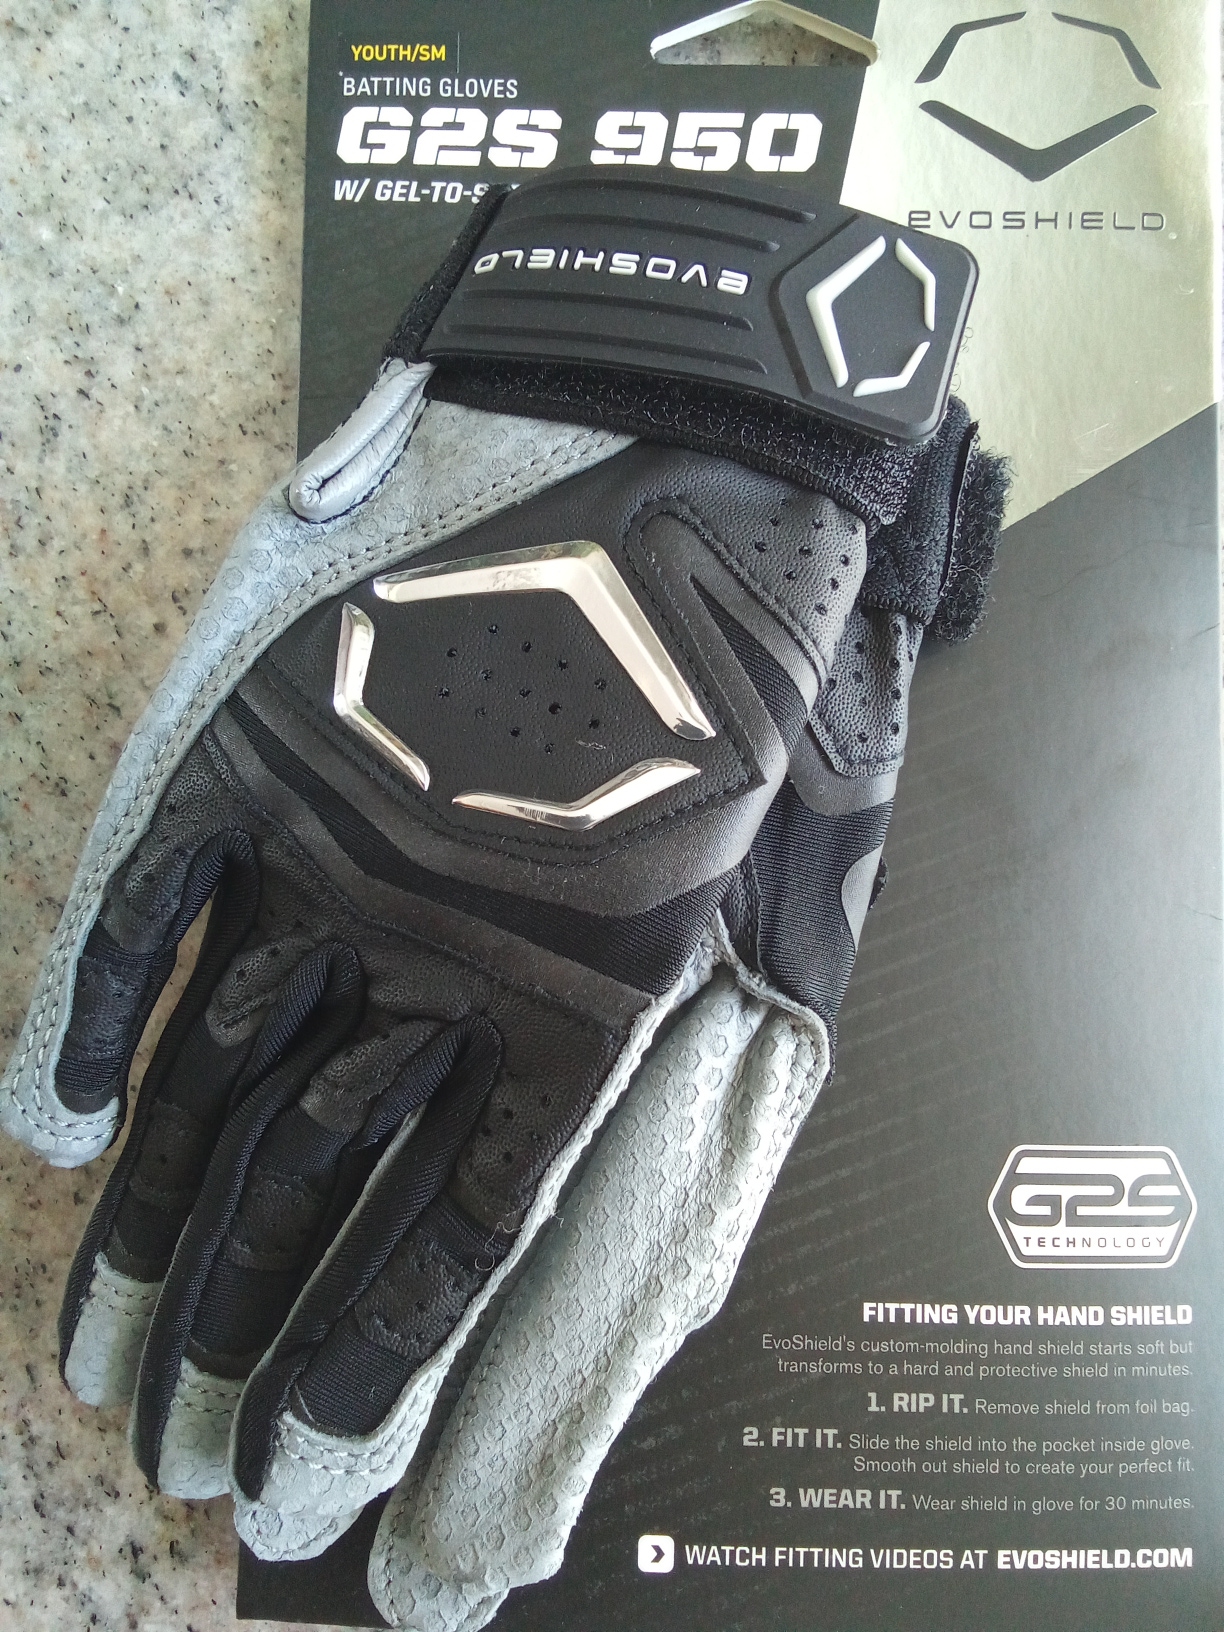 Evoshield G2S 950 Youth/small BATTING GLOVES W/Gel-to-Shell Protection